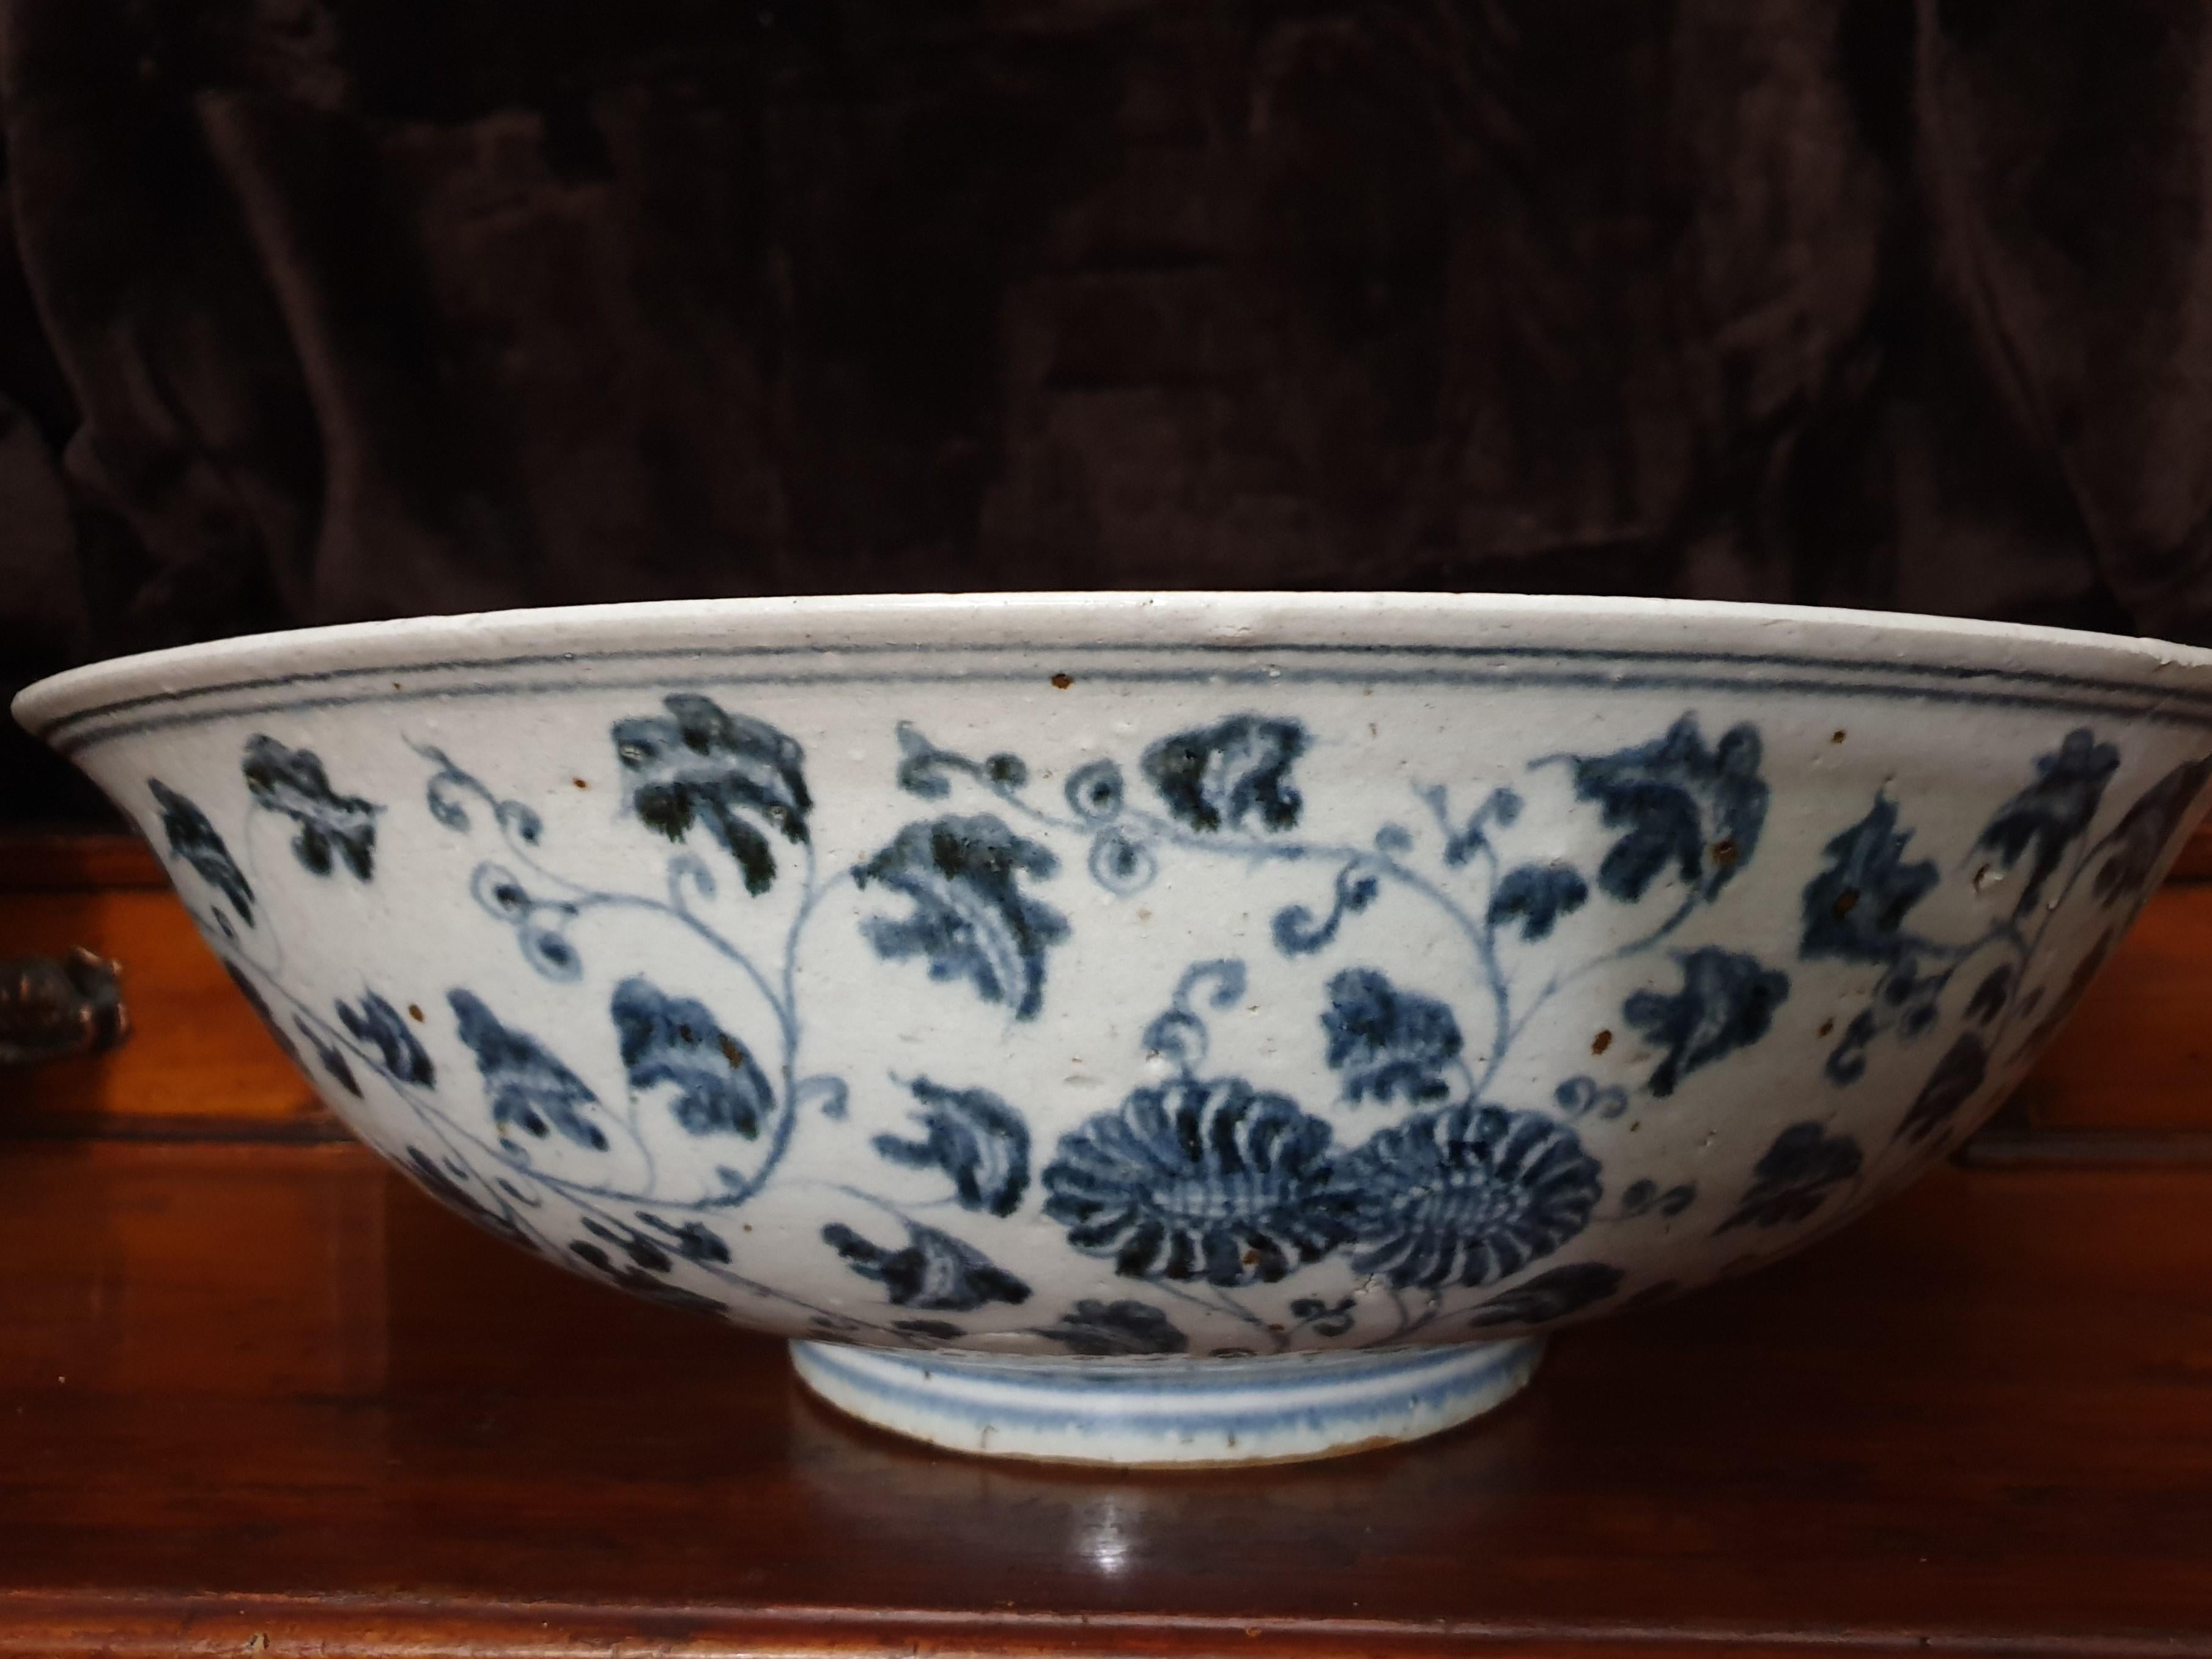 Ming dynasty blue & white large exhibition center piece Imperial Provincial bowl Yongle Pattern. The central medallion is finely painted with floral scroll including rose, hibiscus, pomegranate, lotus, peony, chrysanthemum, and camellia blossoms,